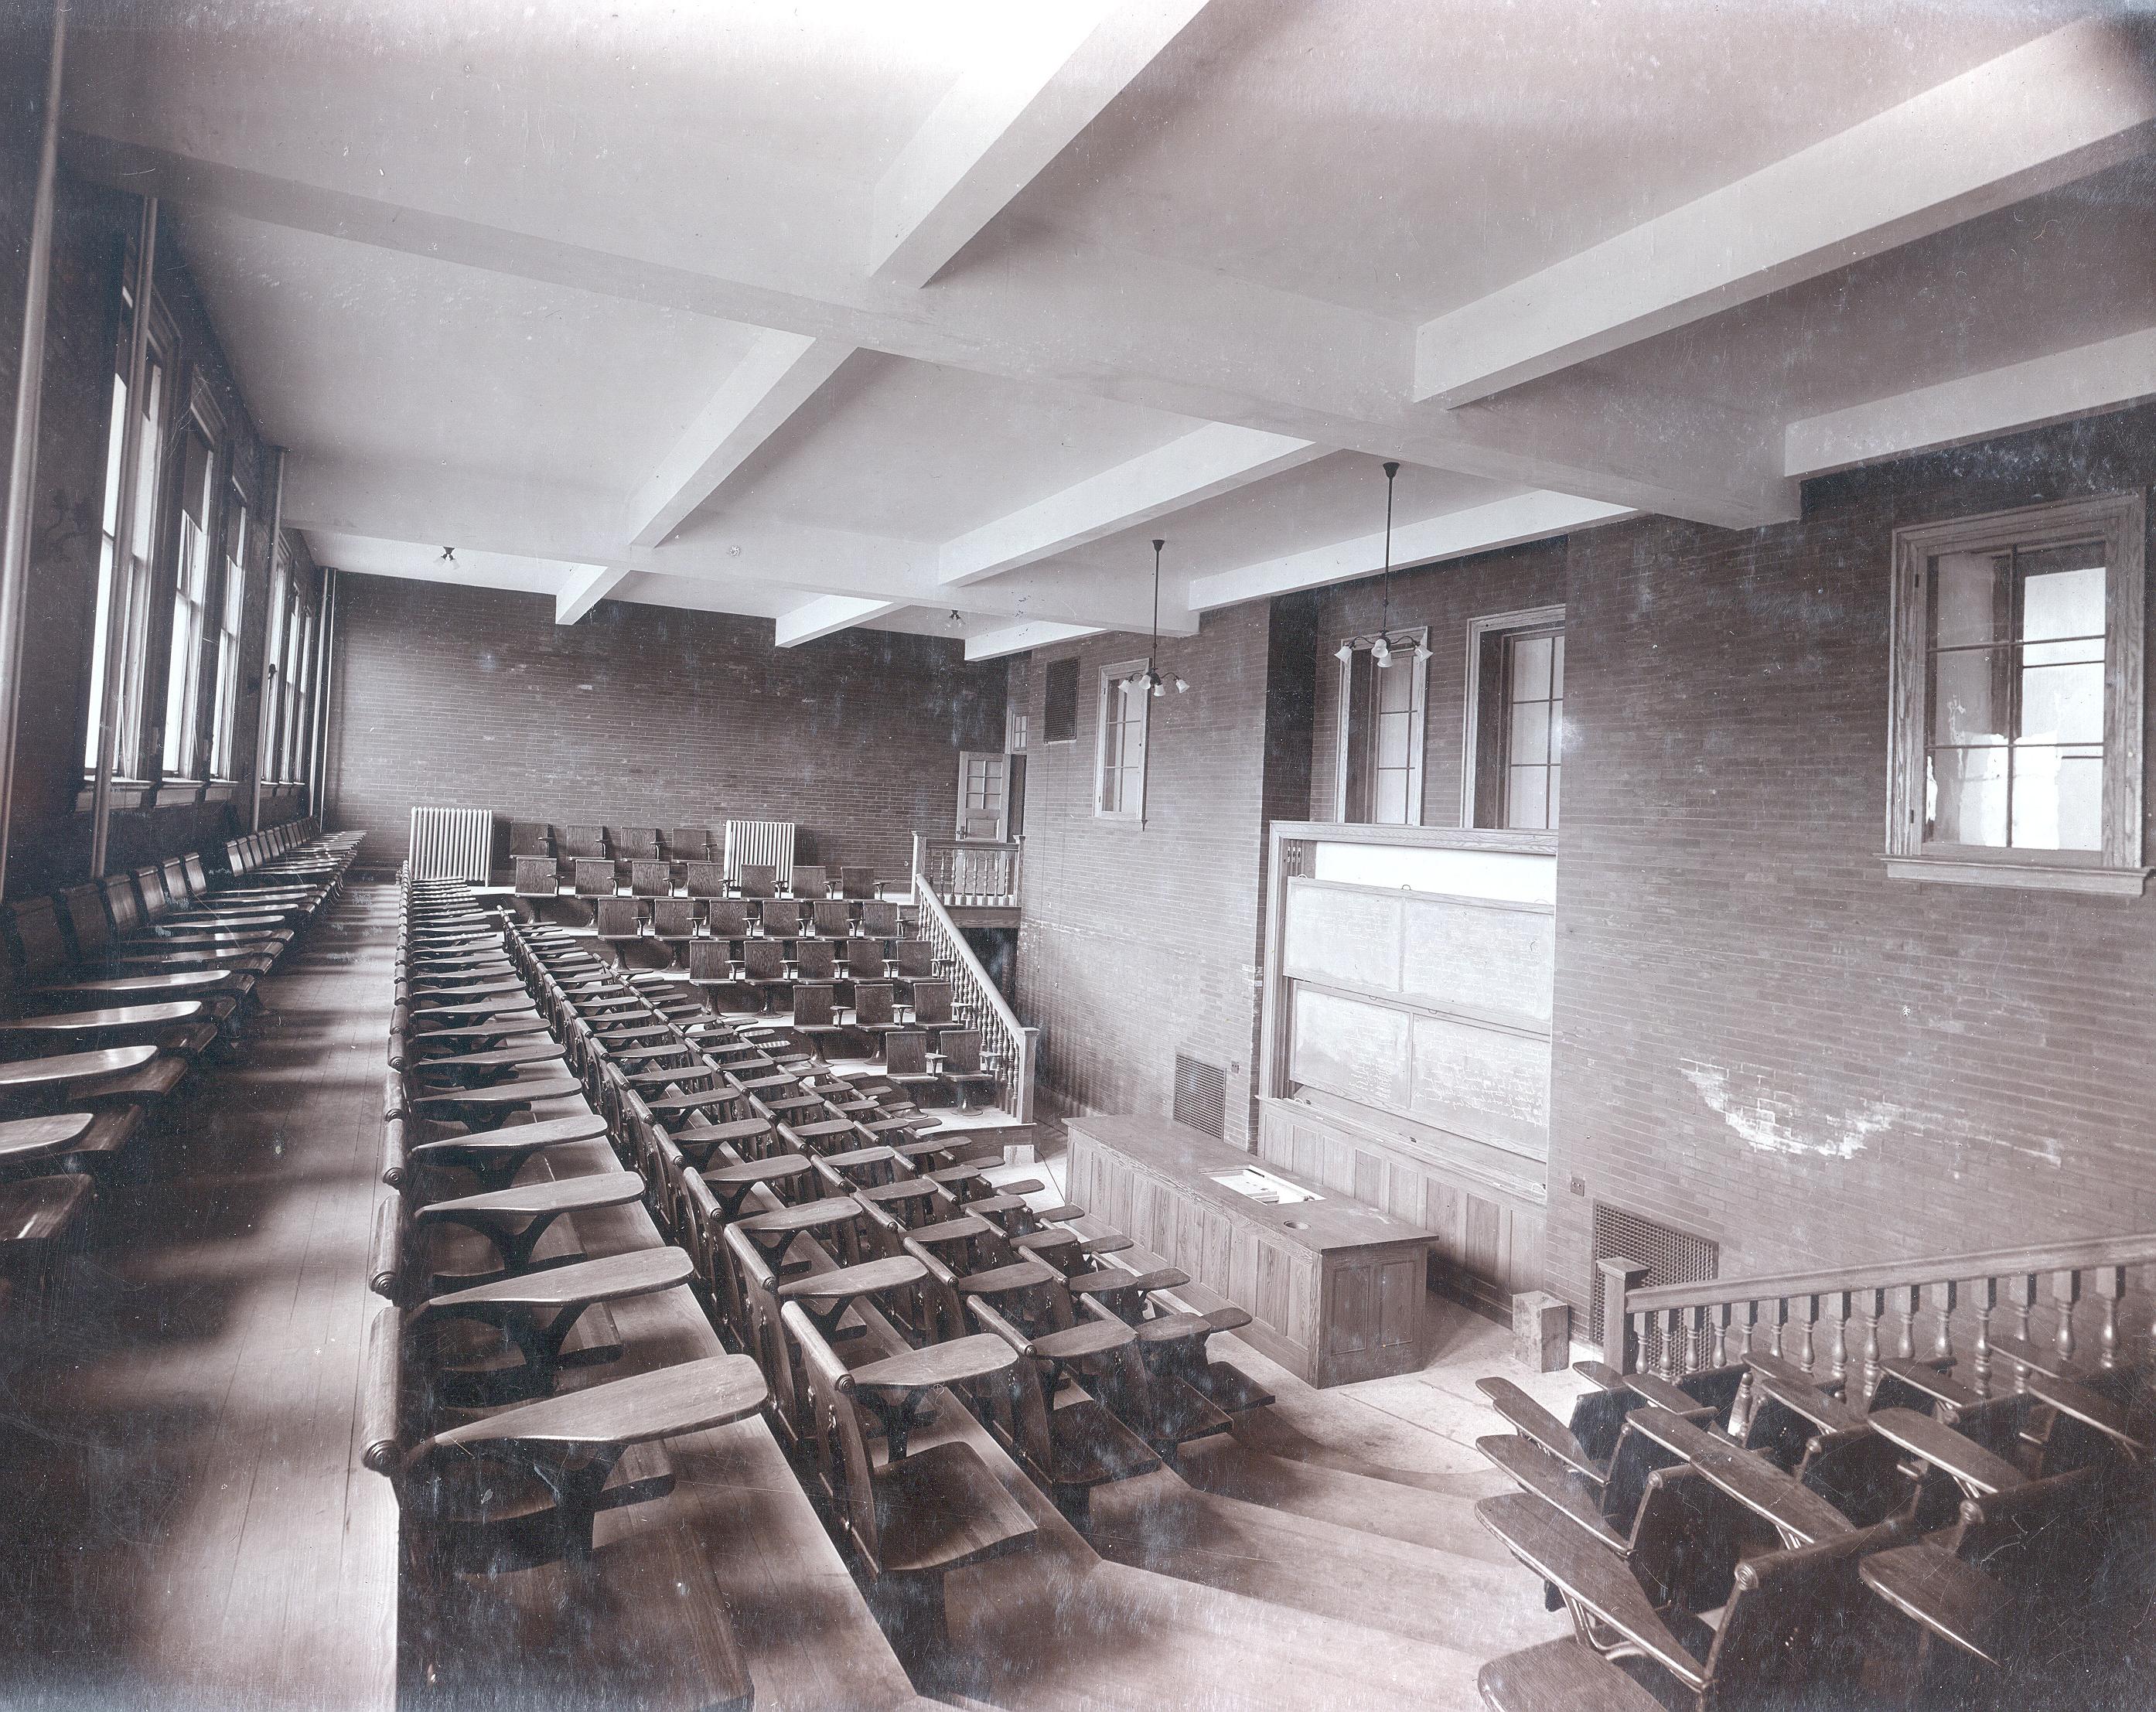 Palmer Hall Amphitheater Lecture Hall circa 1906 <span class="cc-gallery-credit"></span>